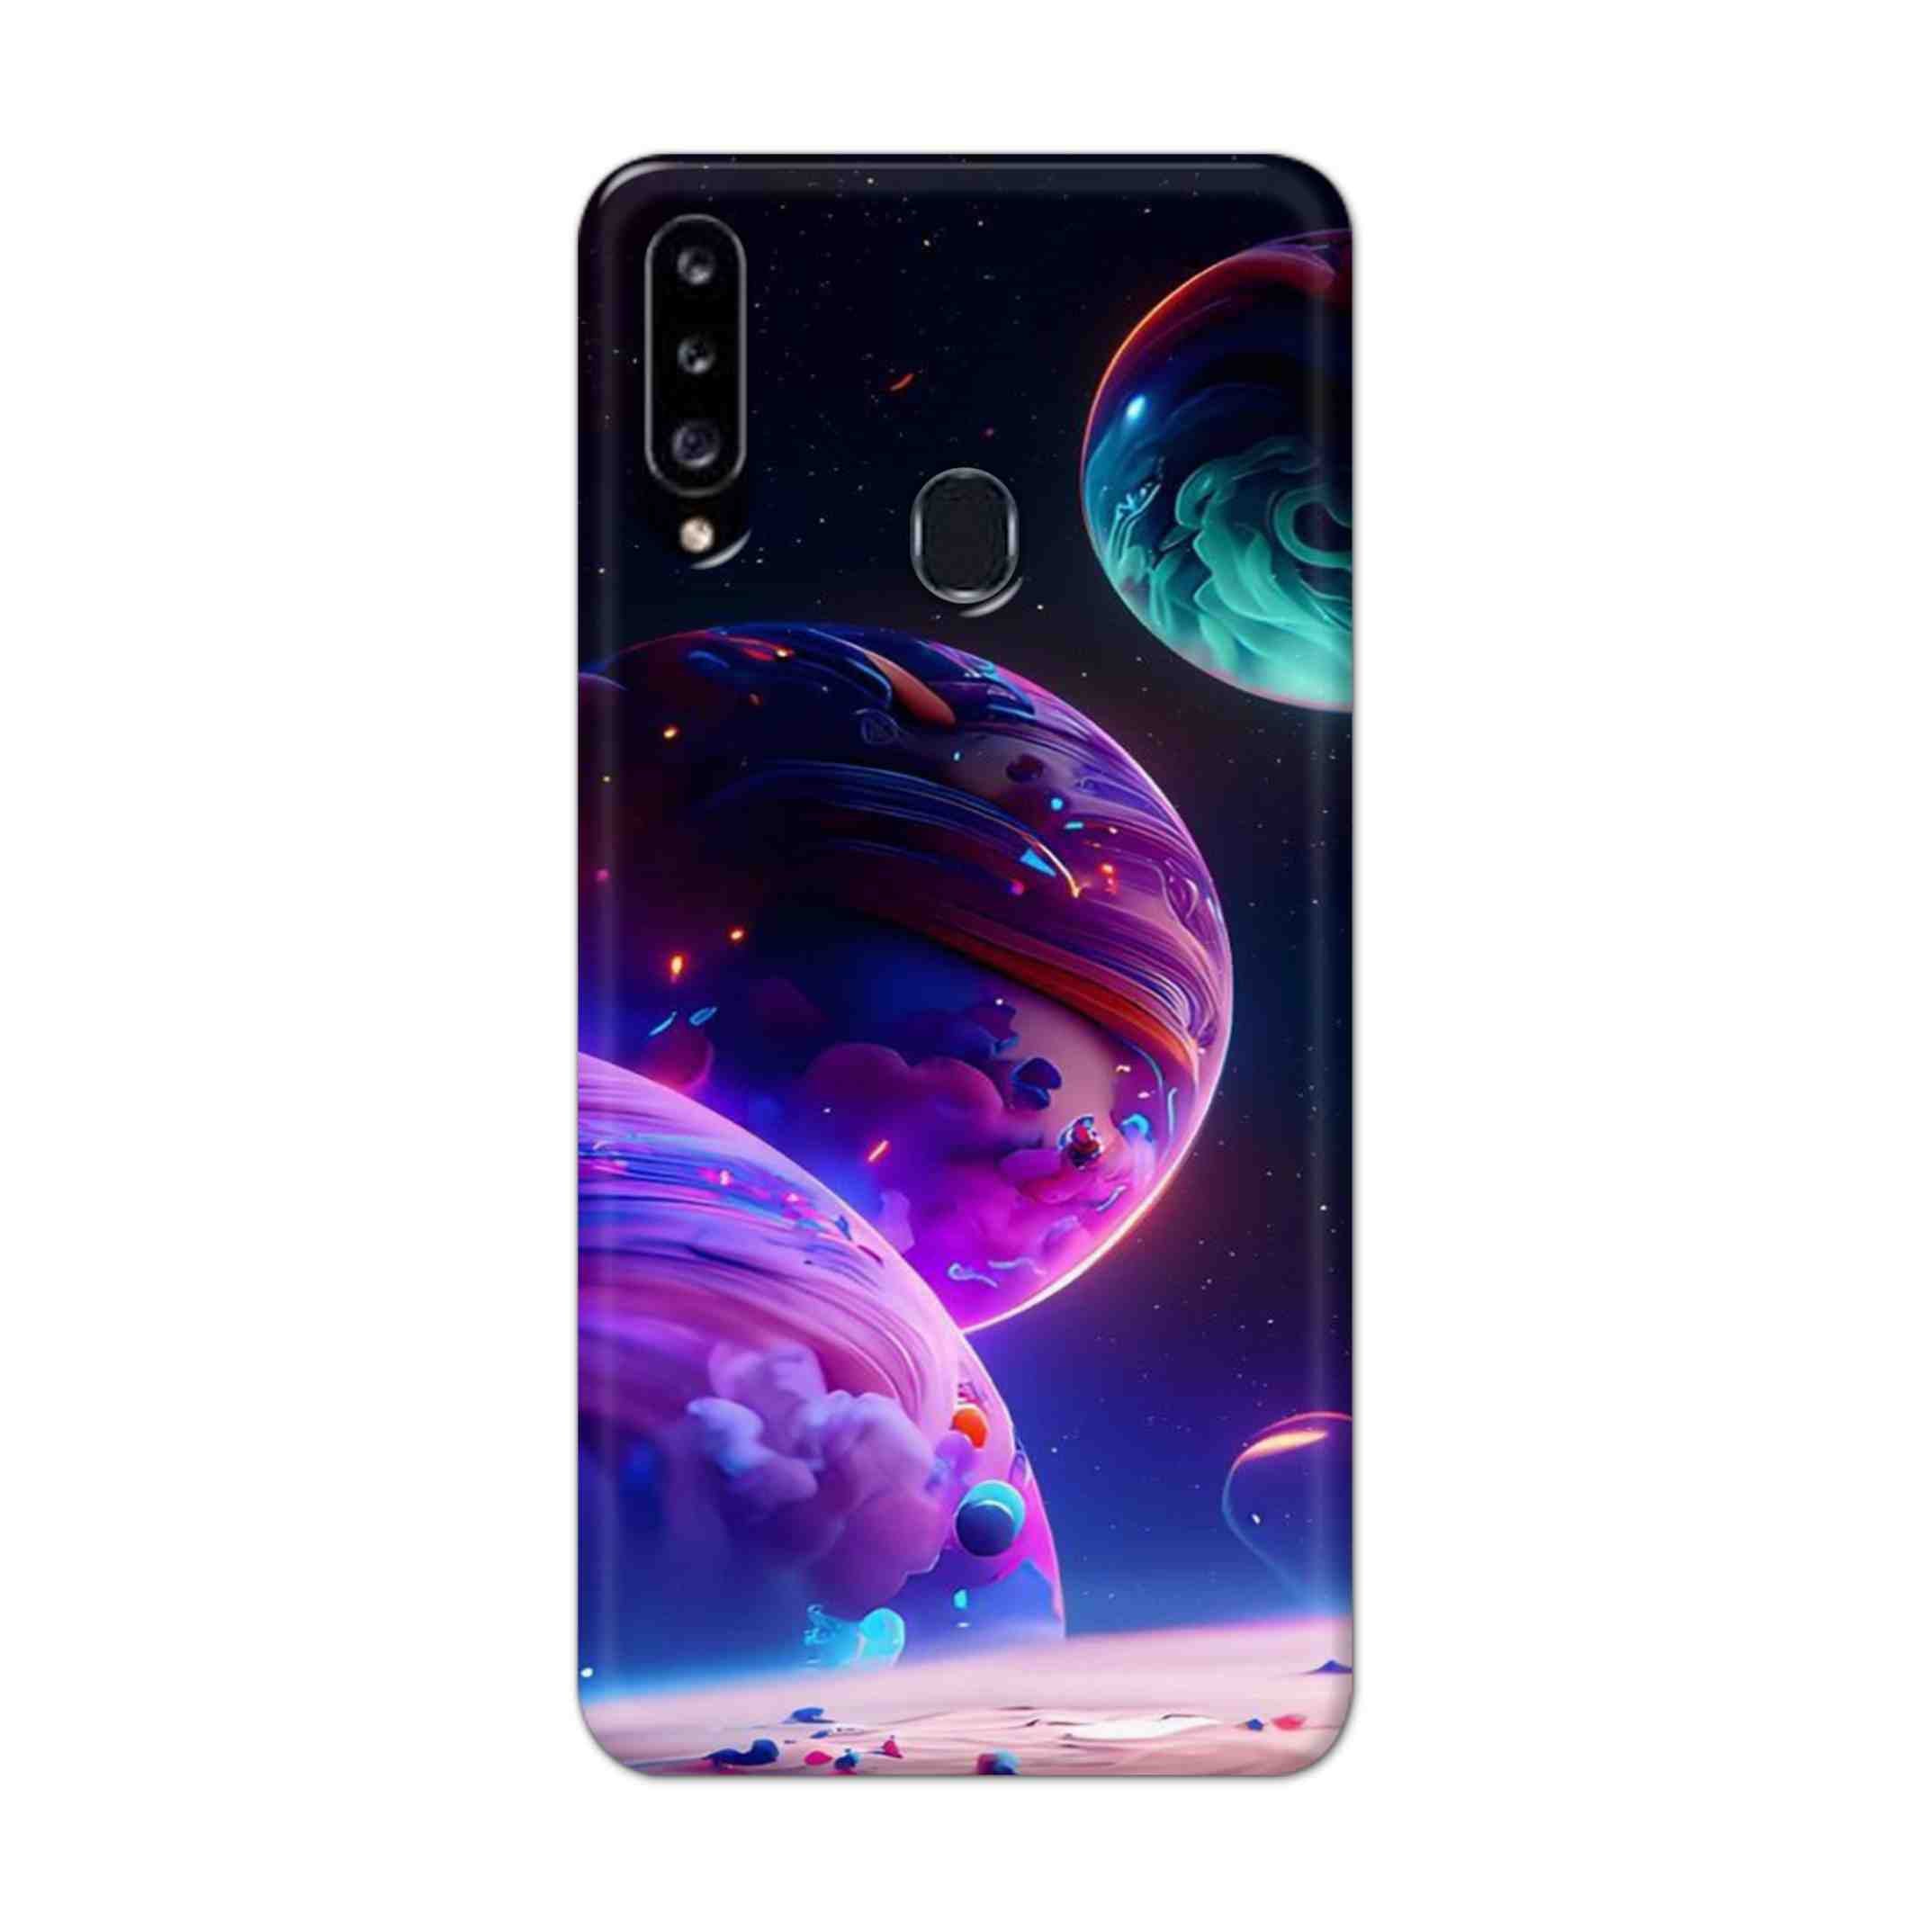 Buy 3 Earth Hard Back Mobile Phone Case Cover For Samsung Galaxy A21 Online